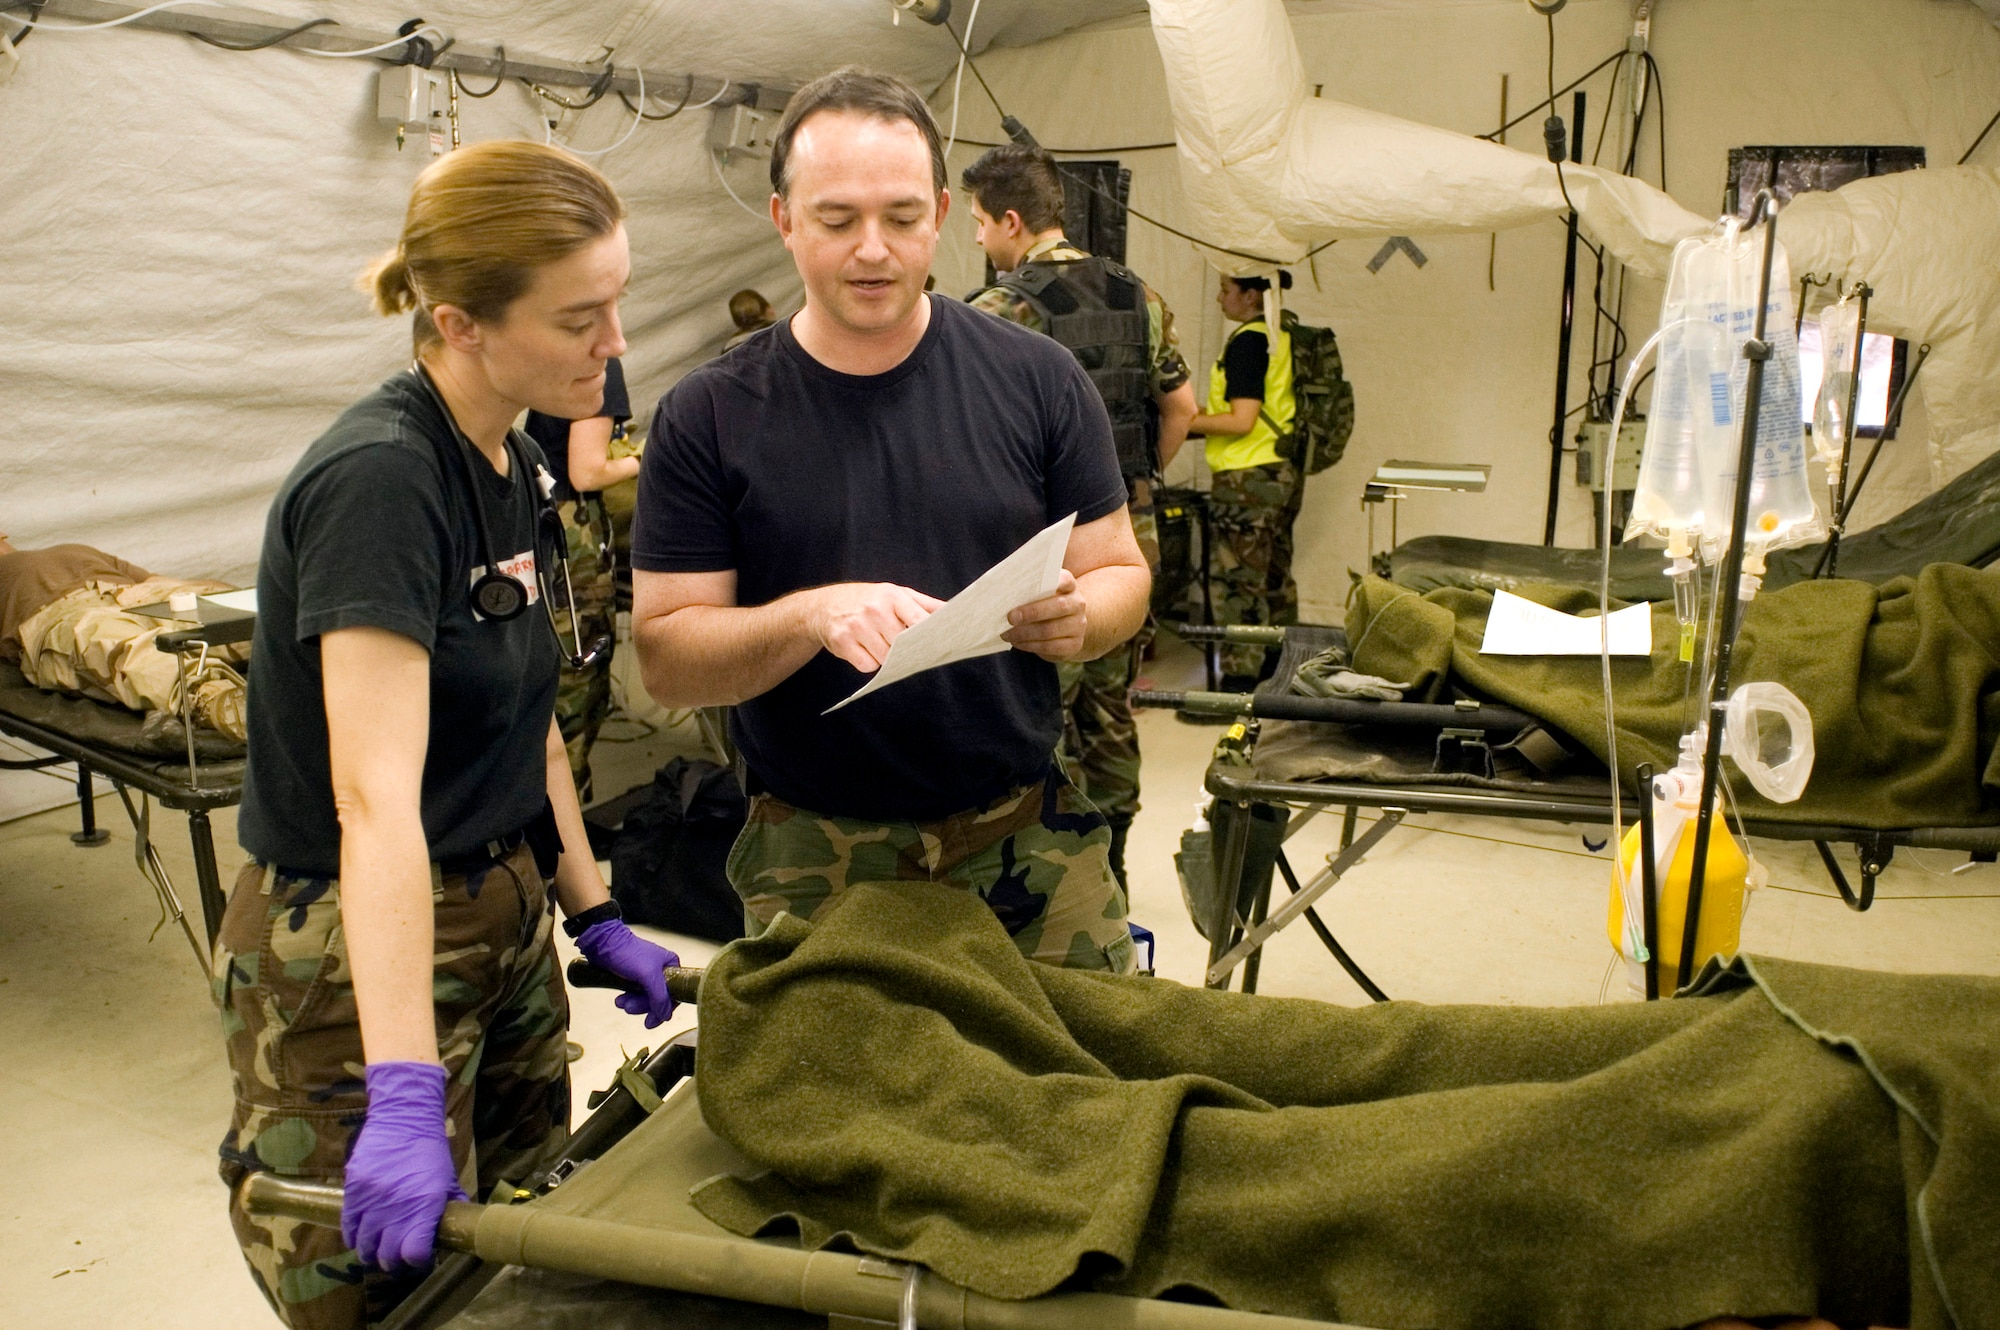 Expeditionary Medical Support student Capt. (Dr.) Laurie Marbas reviews critical patient information Feb. 22 with Critical Care Air Transport Team student, Maj. (Dr.) Stephen Reich prior to transferring the patient. By combining EMEDS and CCATT training, students experience handling patients from triage through transportation from a field hospital back to the states. (U.S.Air Force photo/Steve Thurow) 